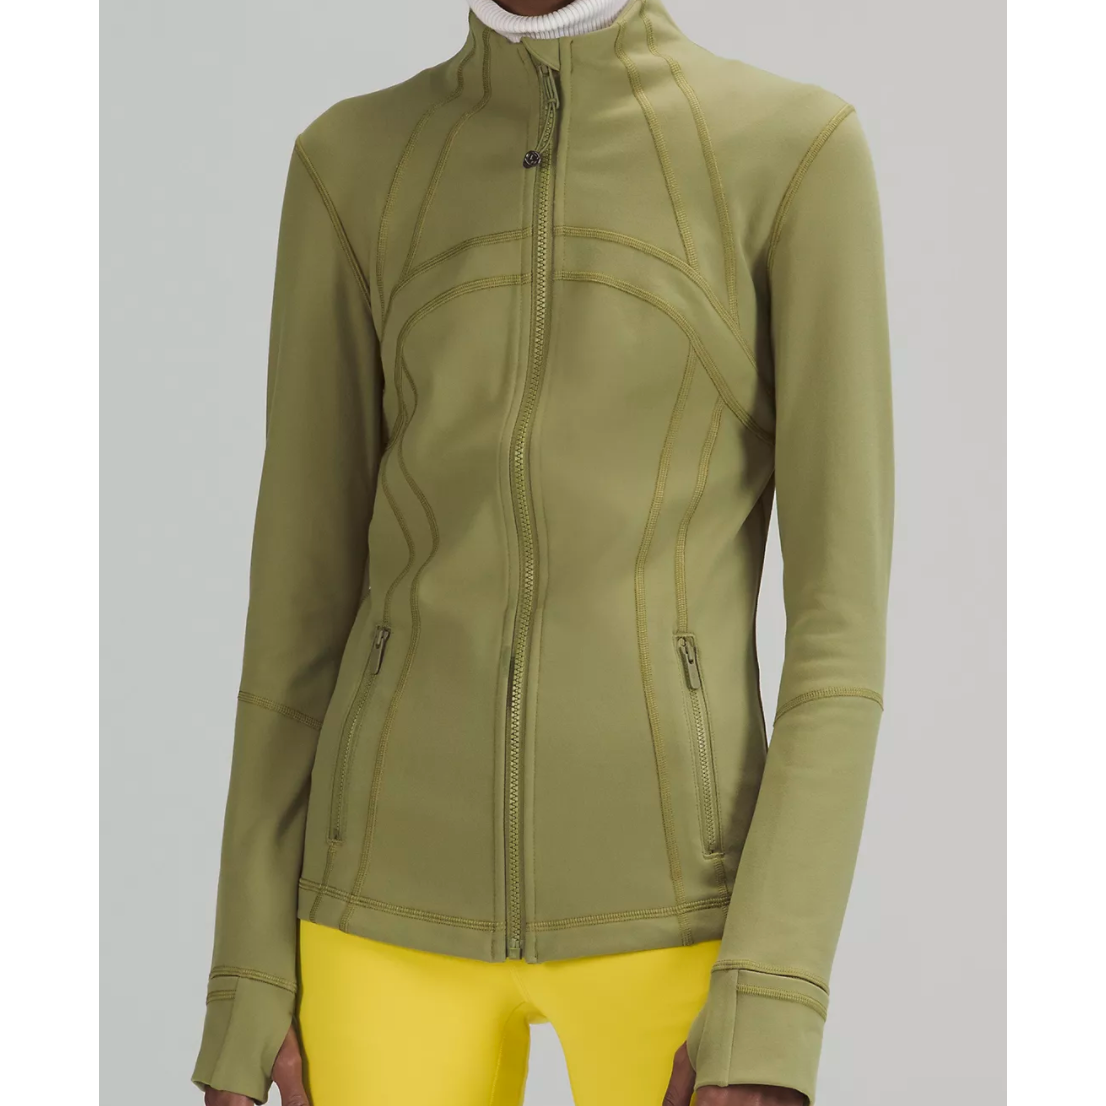 NWT Lululemon Size 4 Define Jacket Luon Everglade Green And Gold